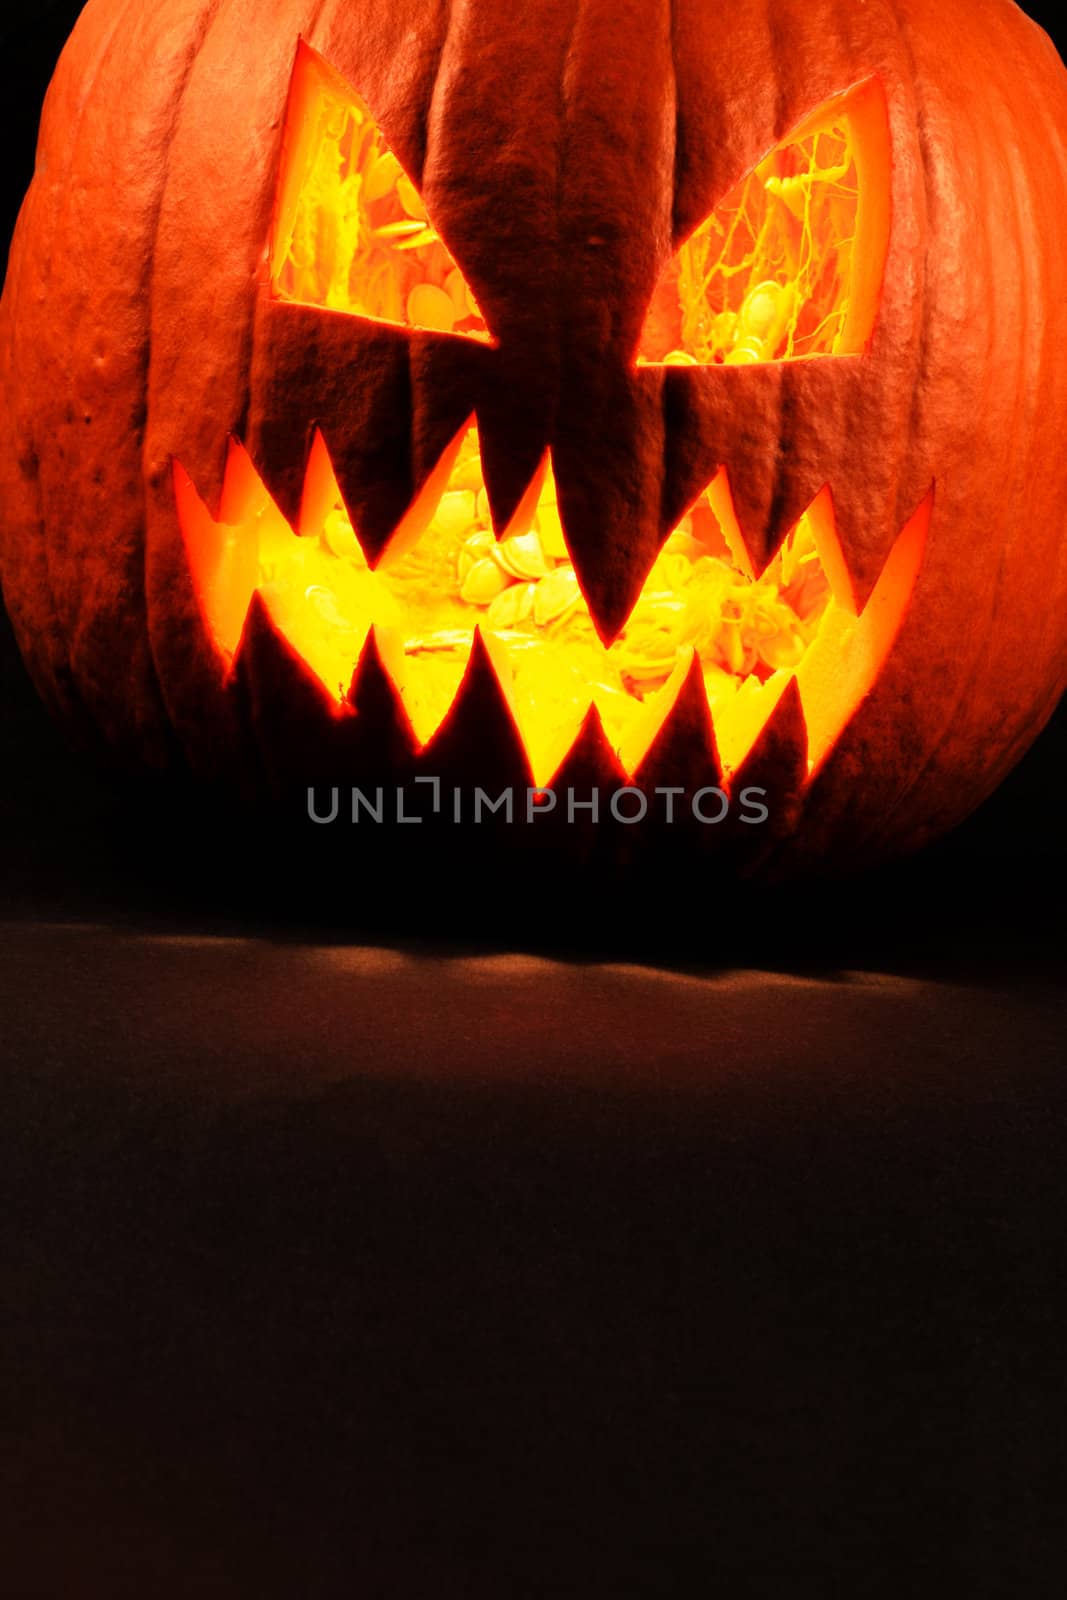 Heavy contrast photo of a carved evil pumpkin glowing.  Pulp and seeds still inside.
